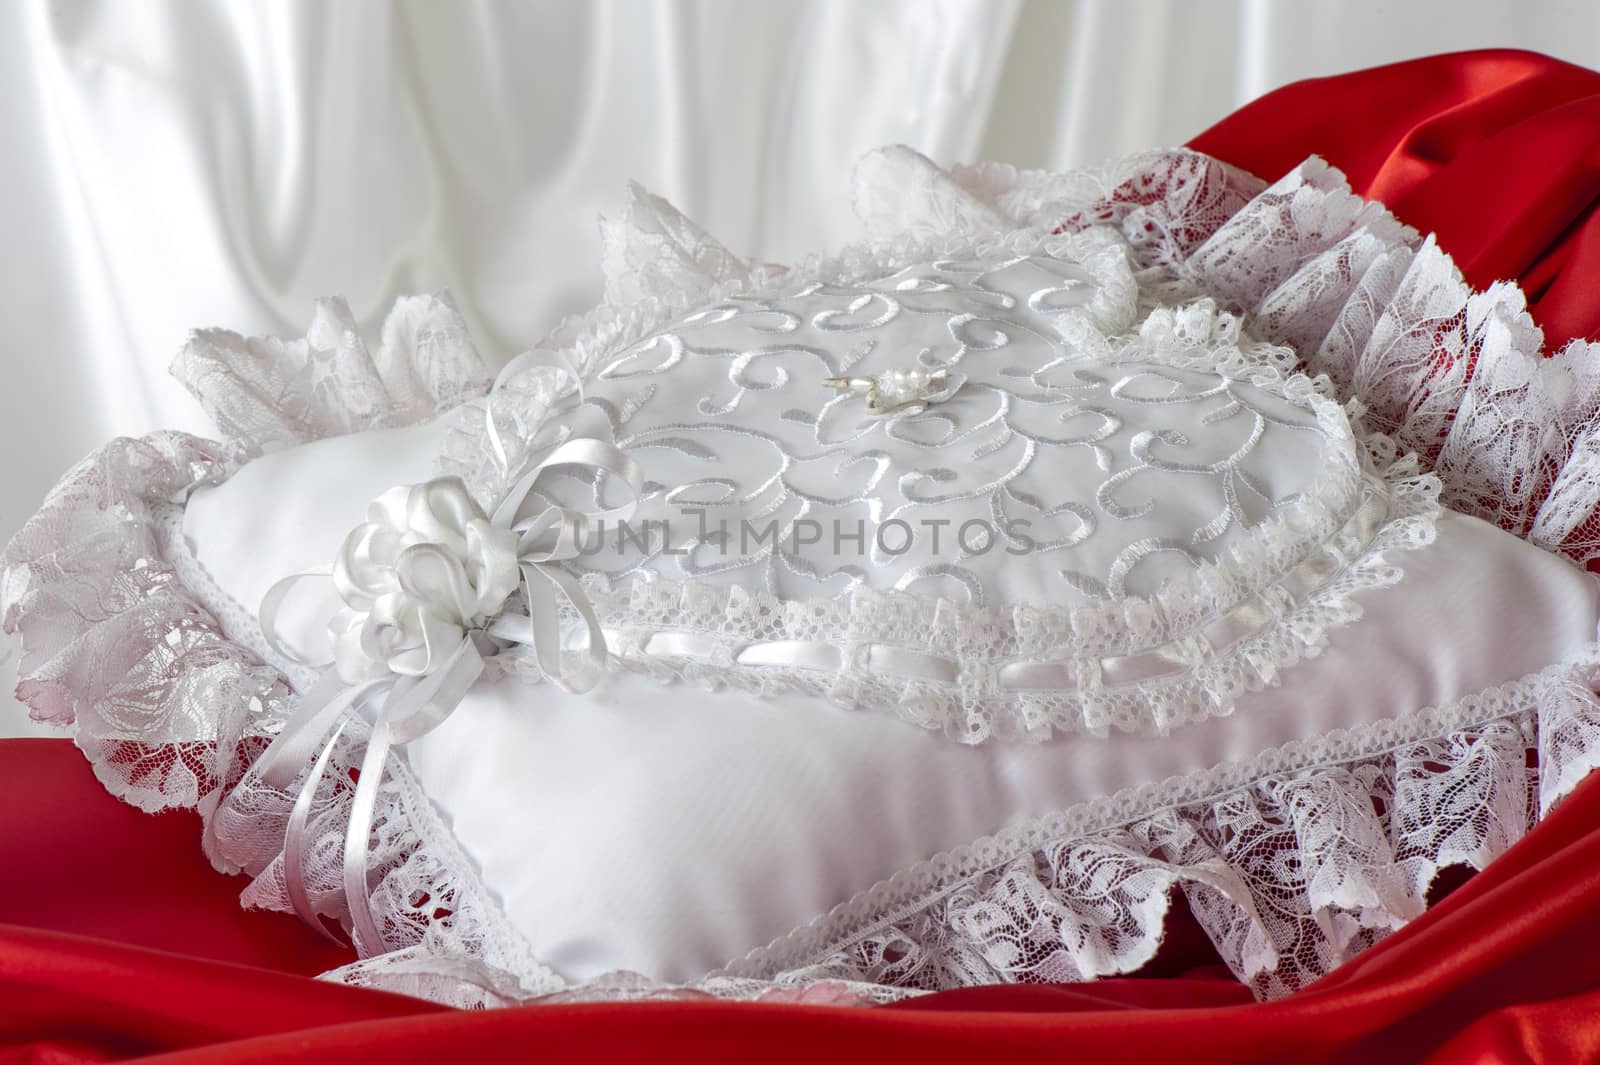 a white pillow for a wedding rings